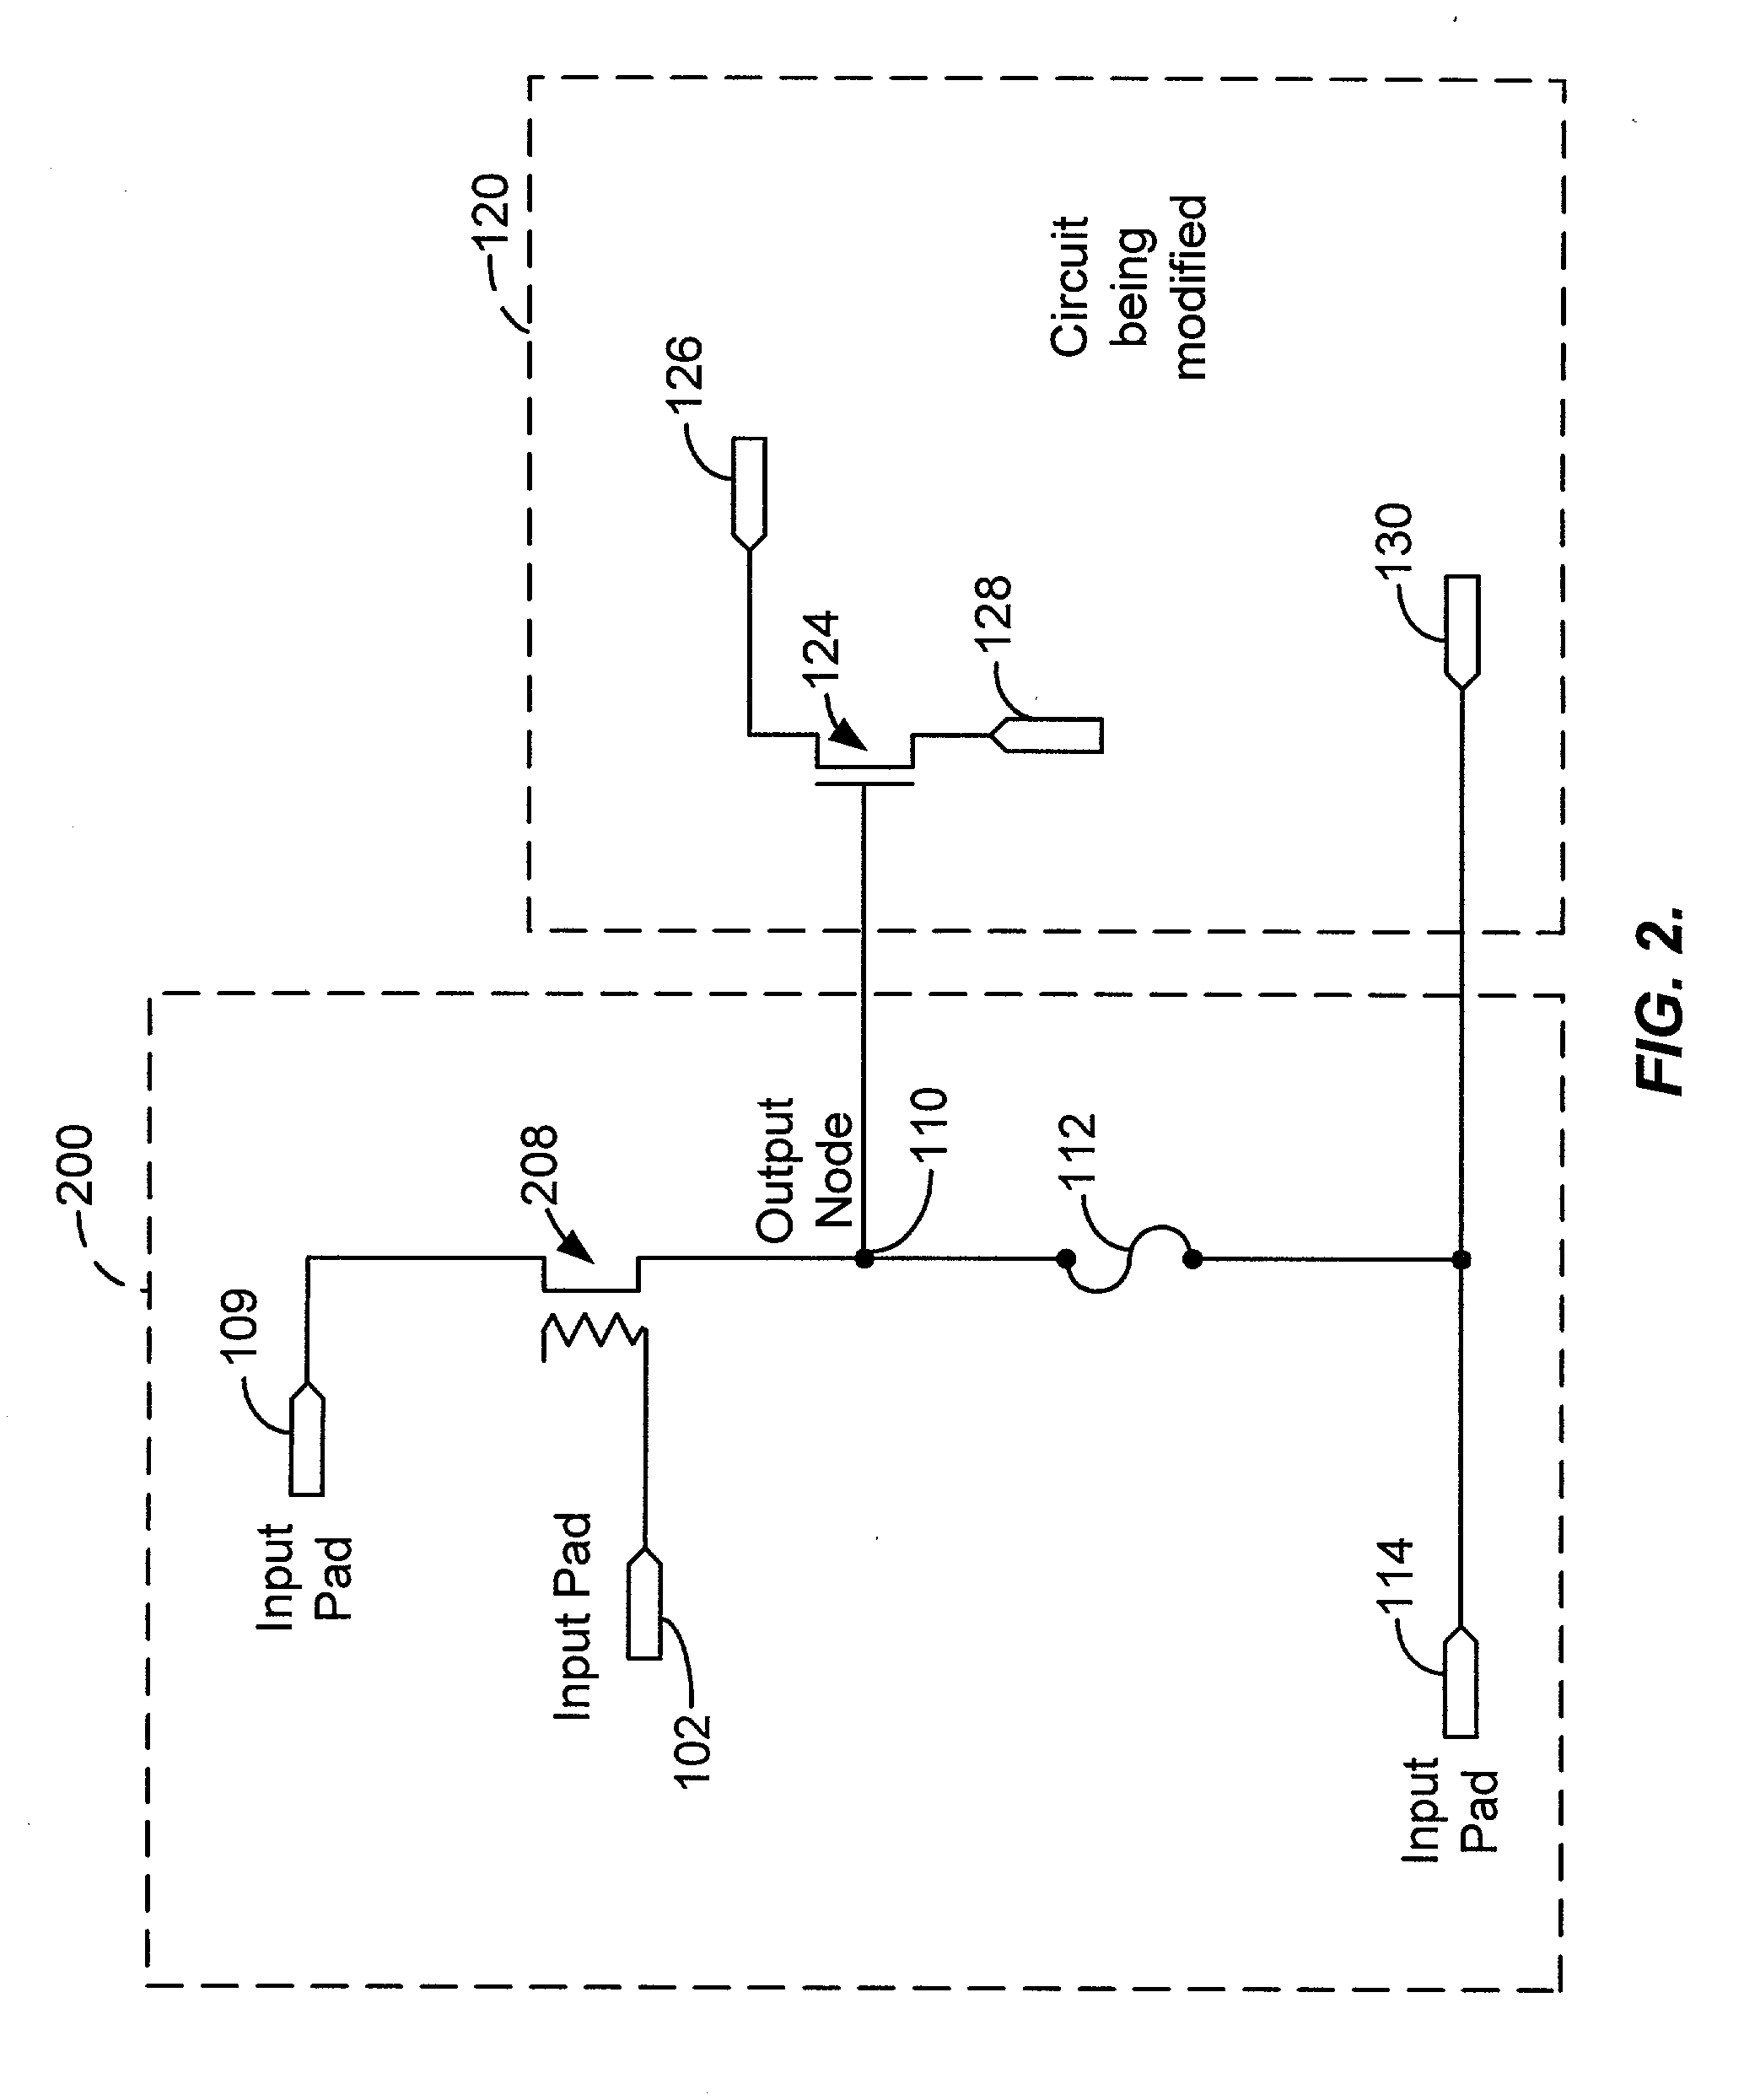 Bounce tolerant fuse trimming circuit with controlled timing